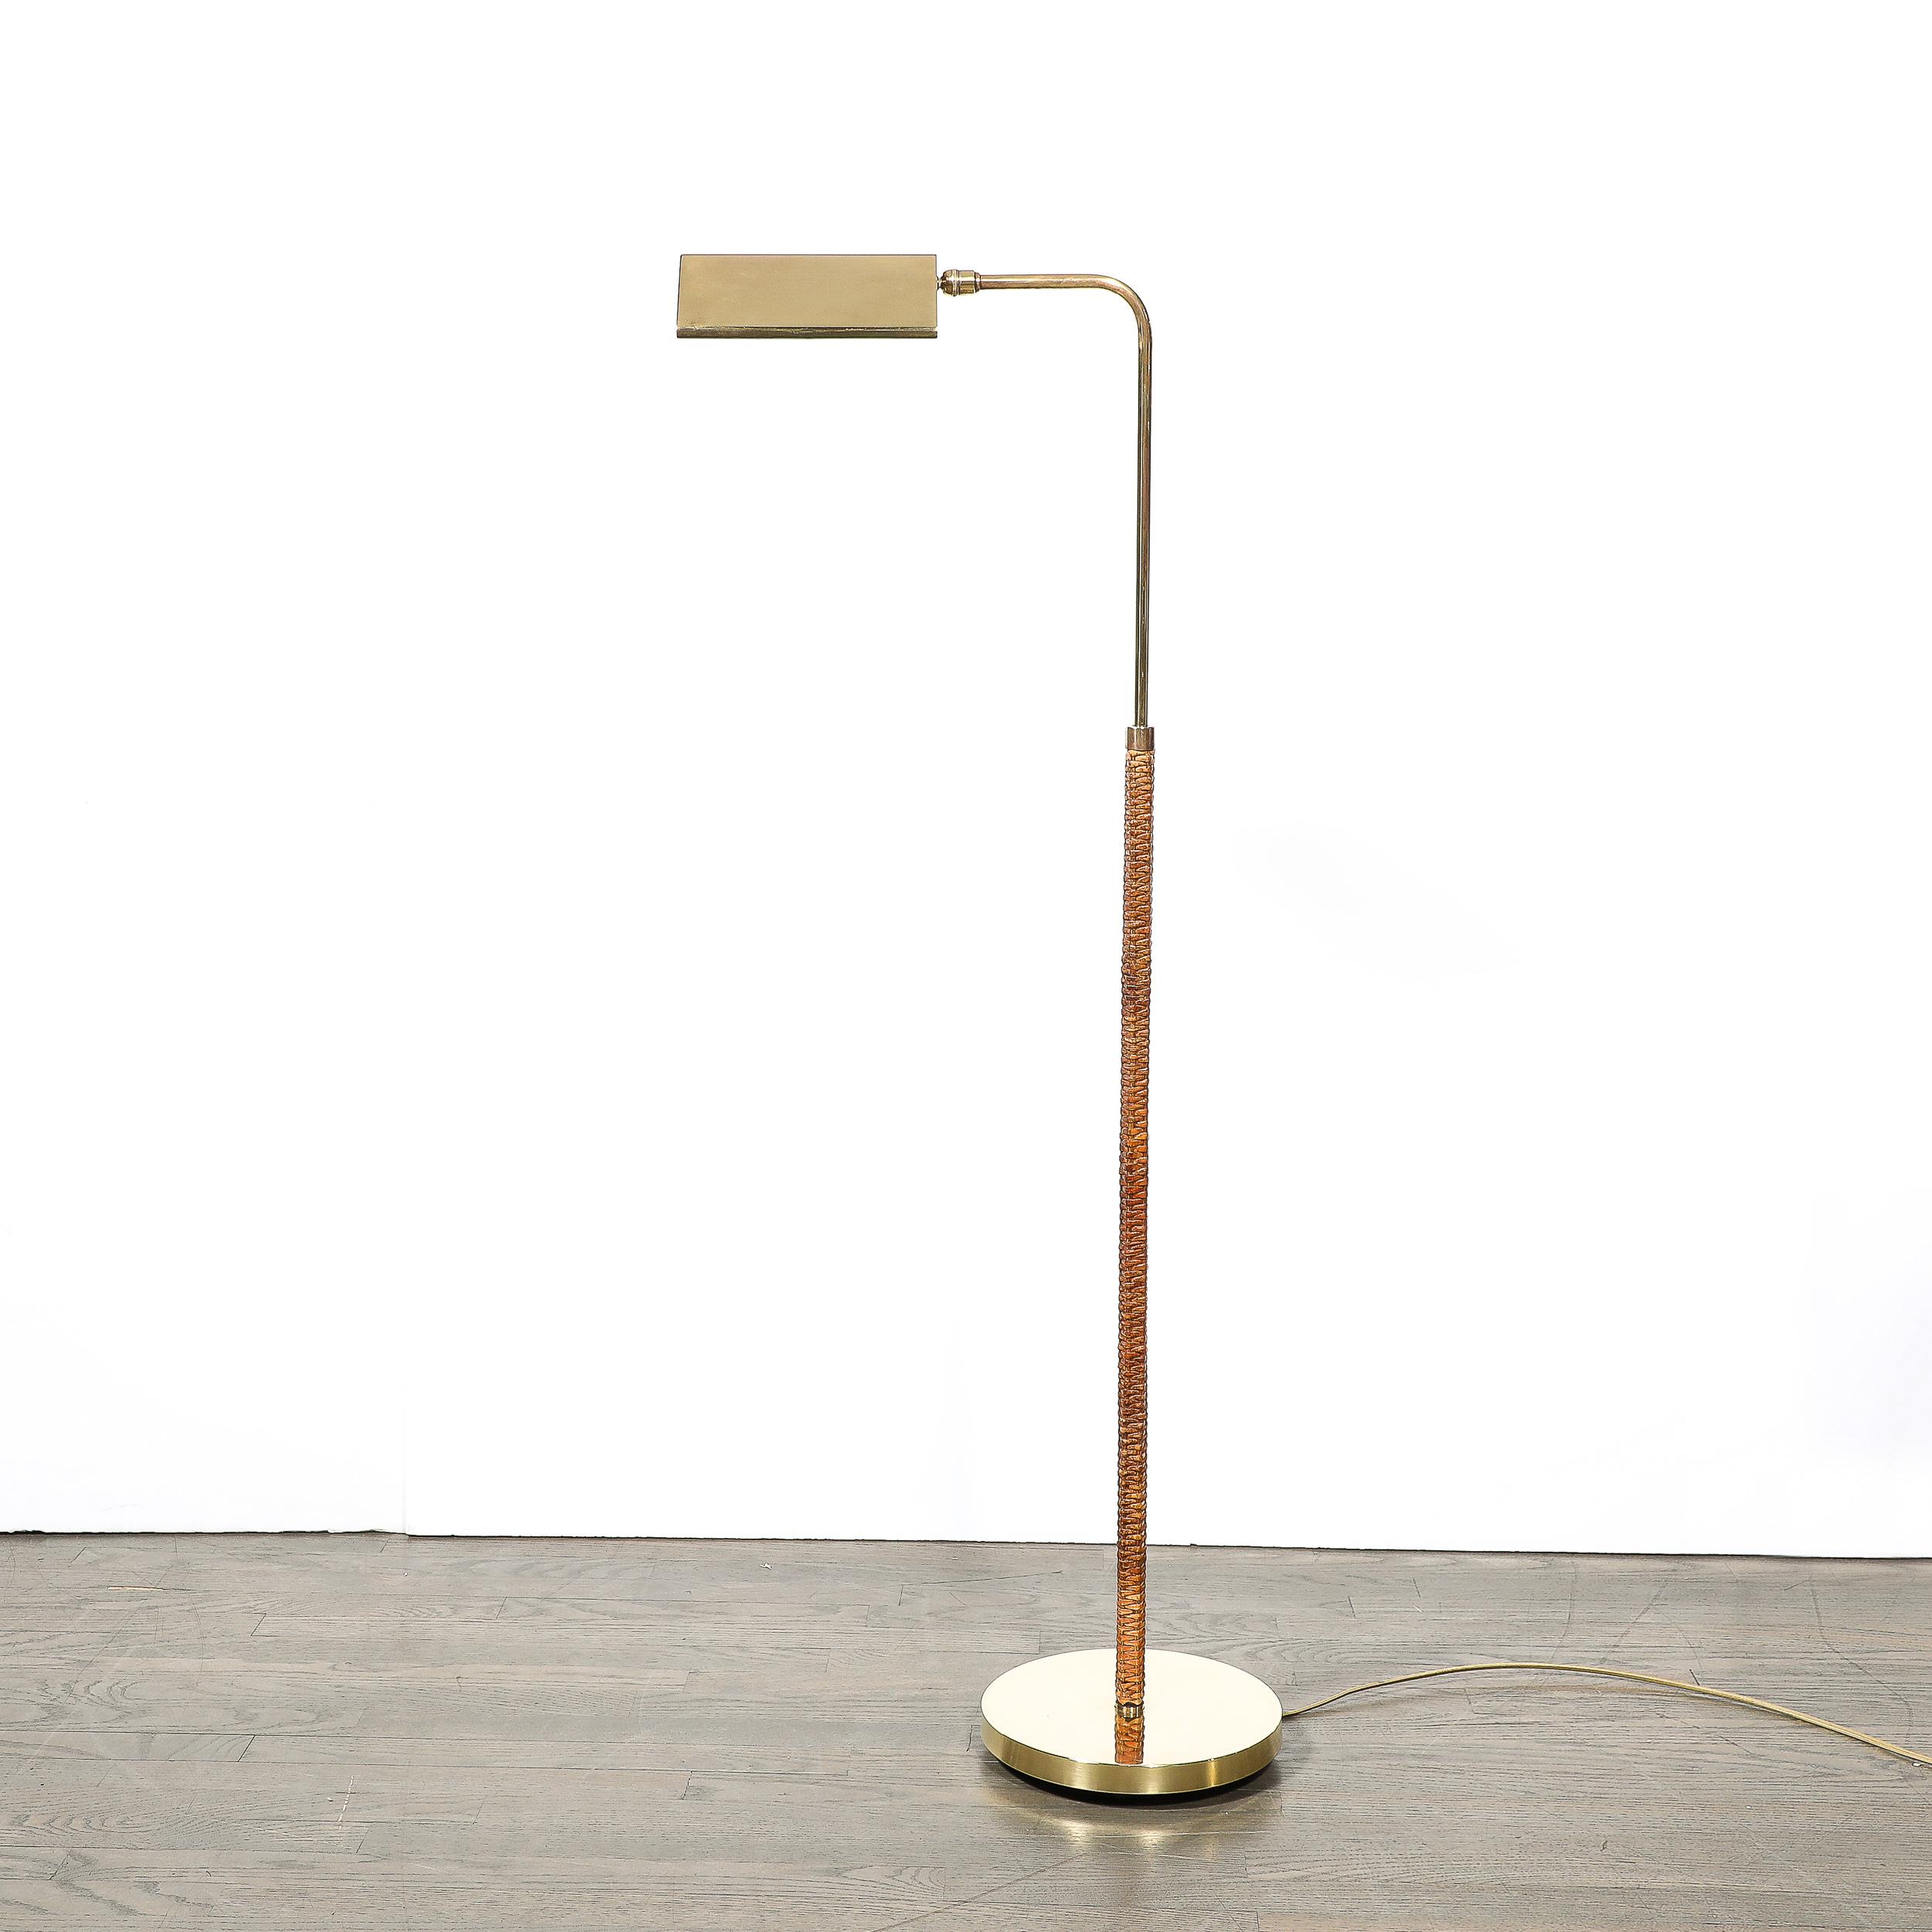 This highly sophisticated and materially exquisite Mid-Century Modernist Articulating Polished Brass and Ratan Wrapped Floor Lamp originates from the United States, Circa 1970. Features a rounded base leading to a rattan wrapped body from which an